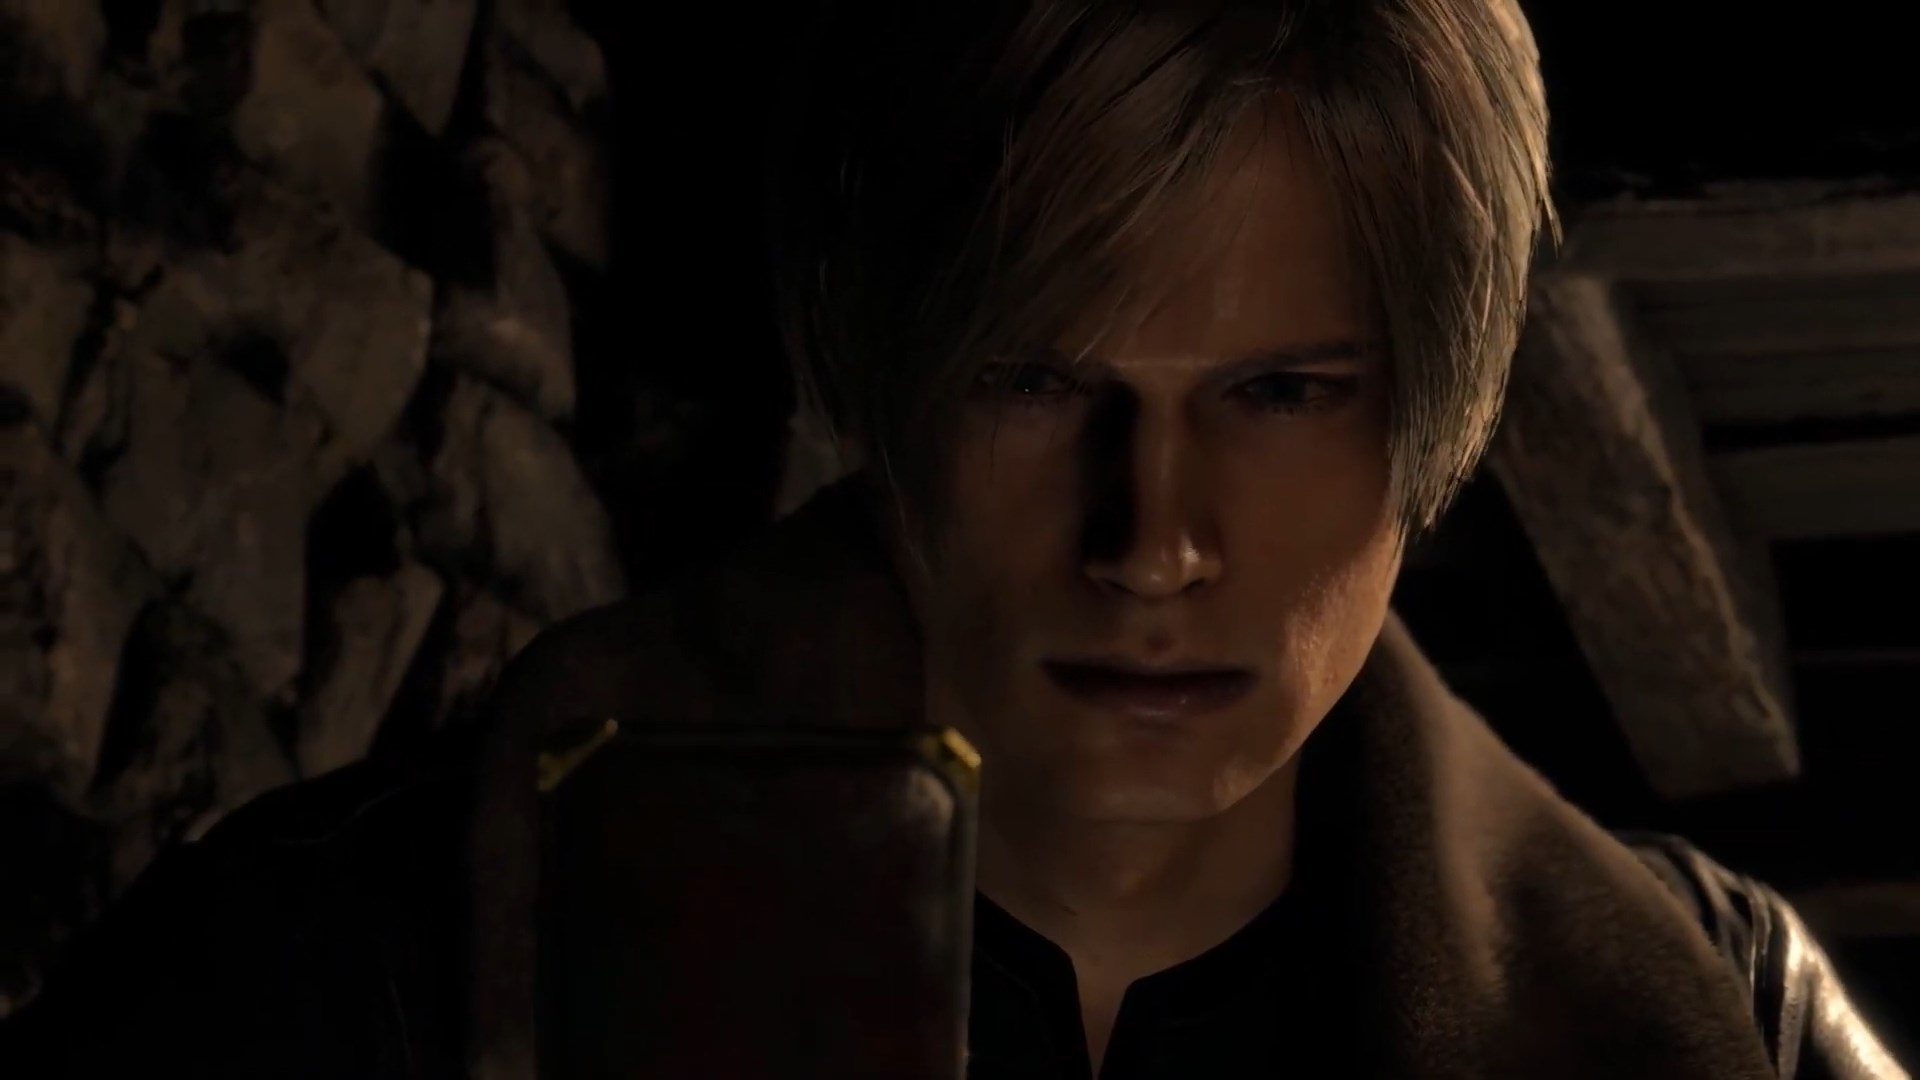 Resident Evil 4 Remake Has A Possibly Divisive Demo - Gameranx